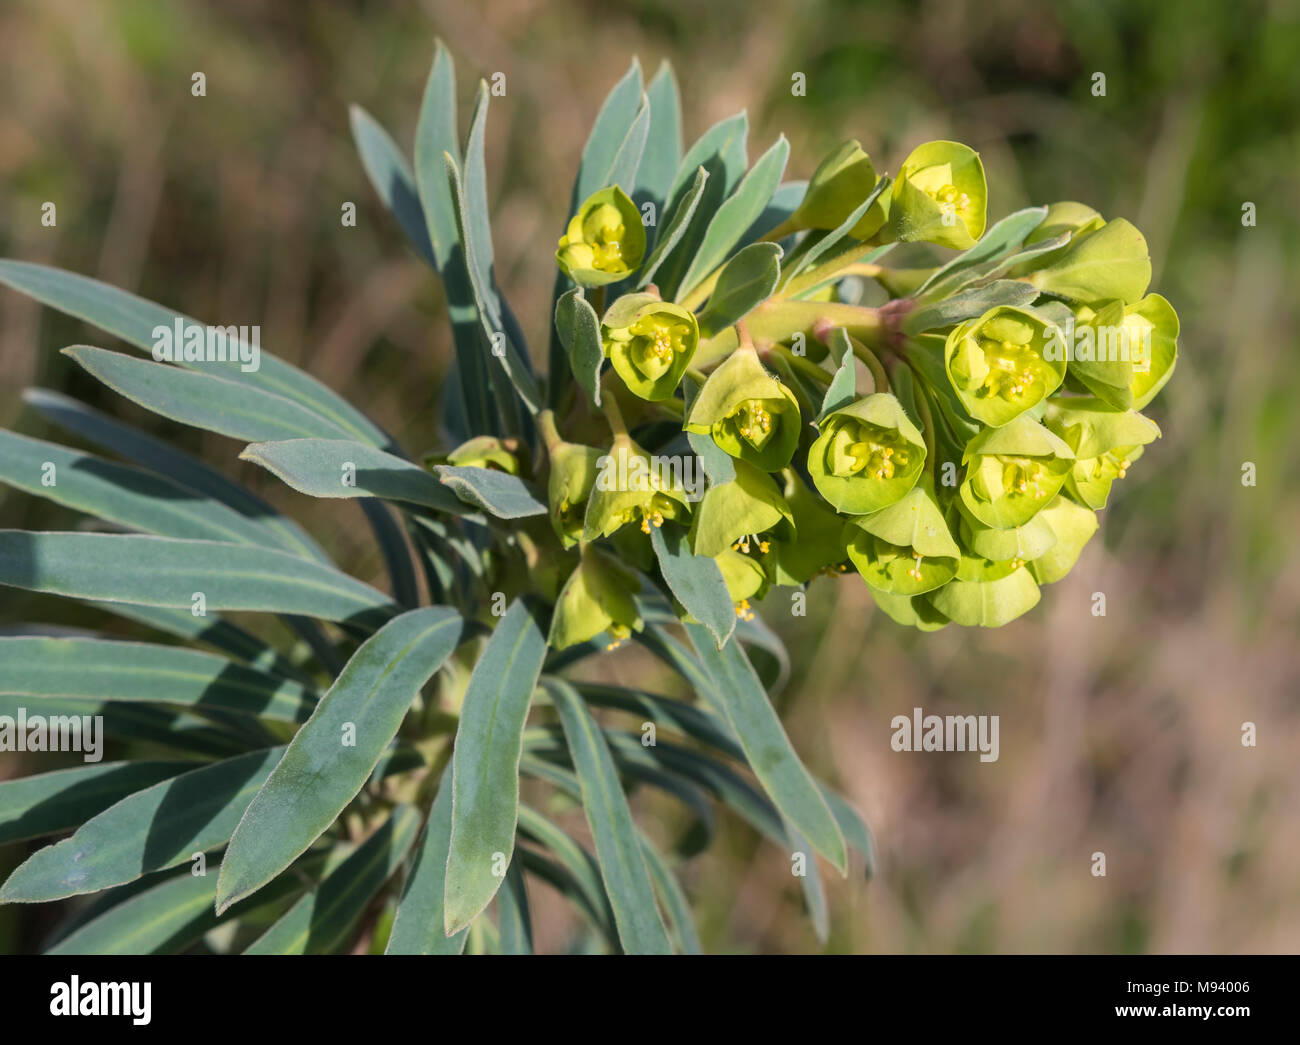 Euphorbia characias subsp. wulfenii (Mediterranean spurge) plant growing in early Spring in the South of the UK. Stock Photo